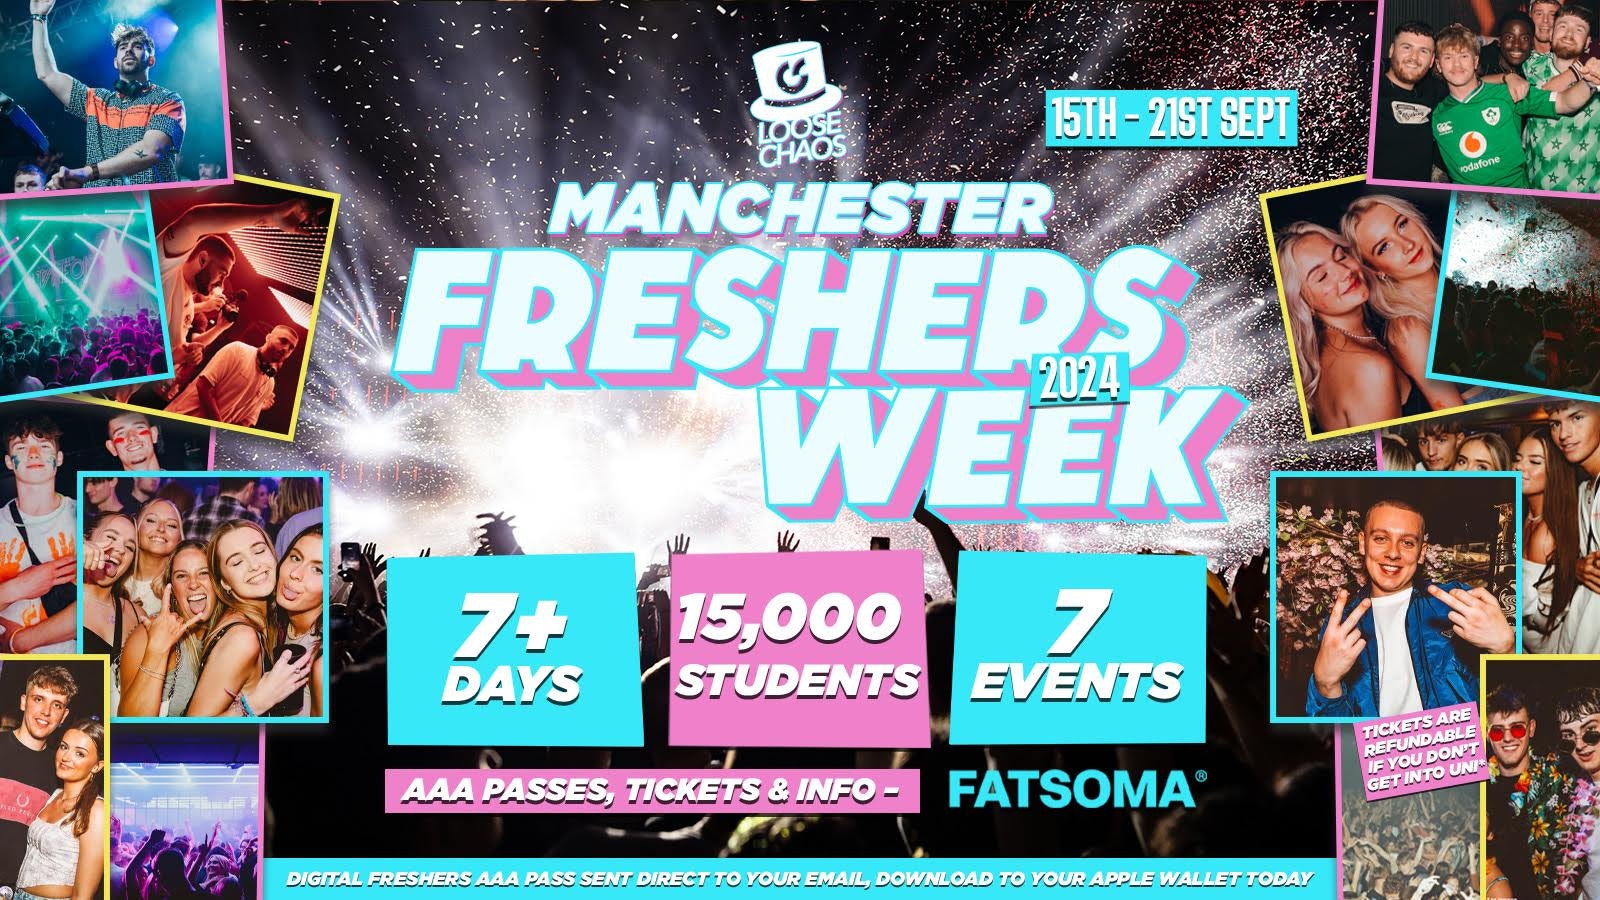 THE LOOSECHAOS MANCHESTER FRESHERS WEEK 🪩💞 7+ EVENTS OVER 7+ DAYS // INCLUDES TROPILOCO – JOSHUA BROOK + ARK & MORE // LESS THAN £1 PER EVENT! MANCHESTER MET 2024